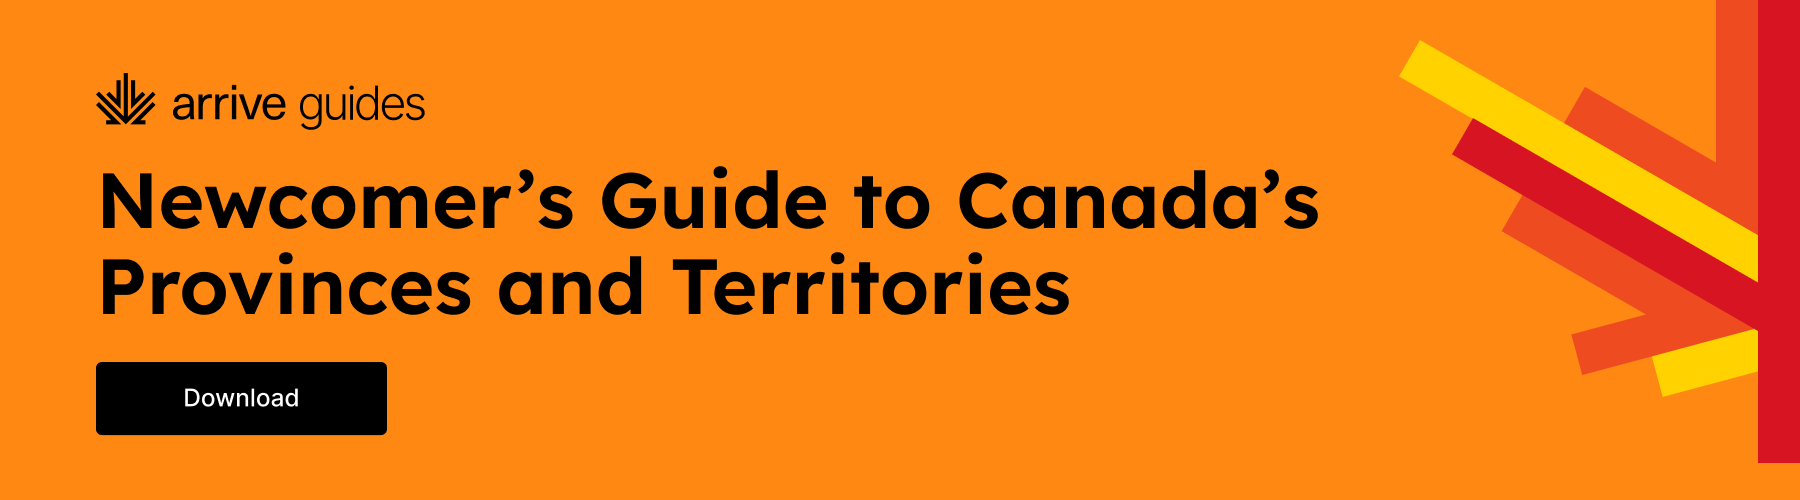 Newcomer's guide to Canada's provinces and territories